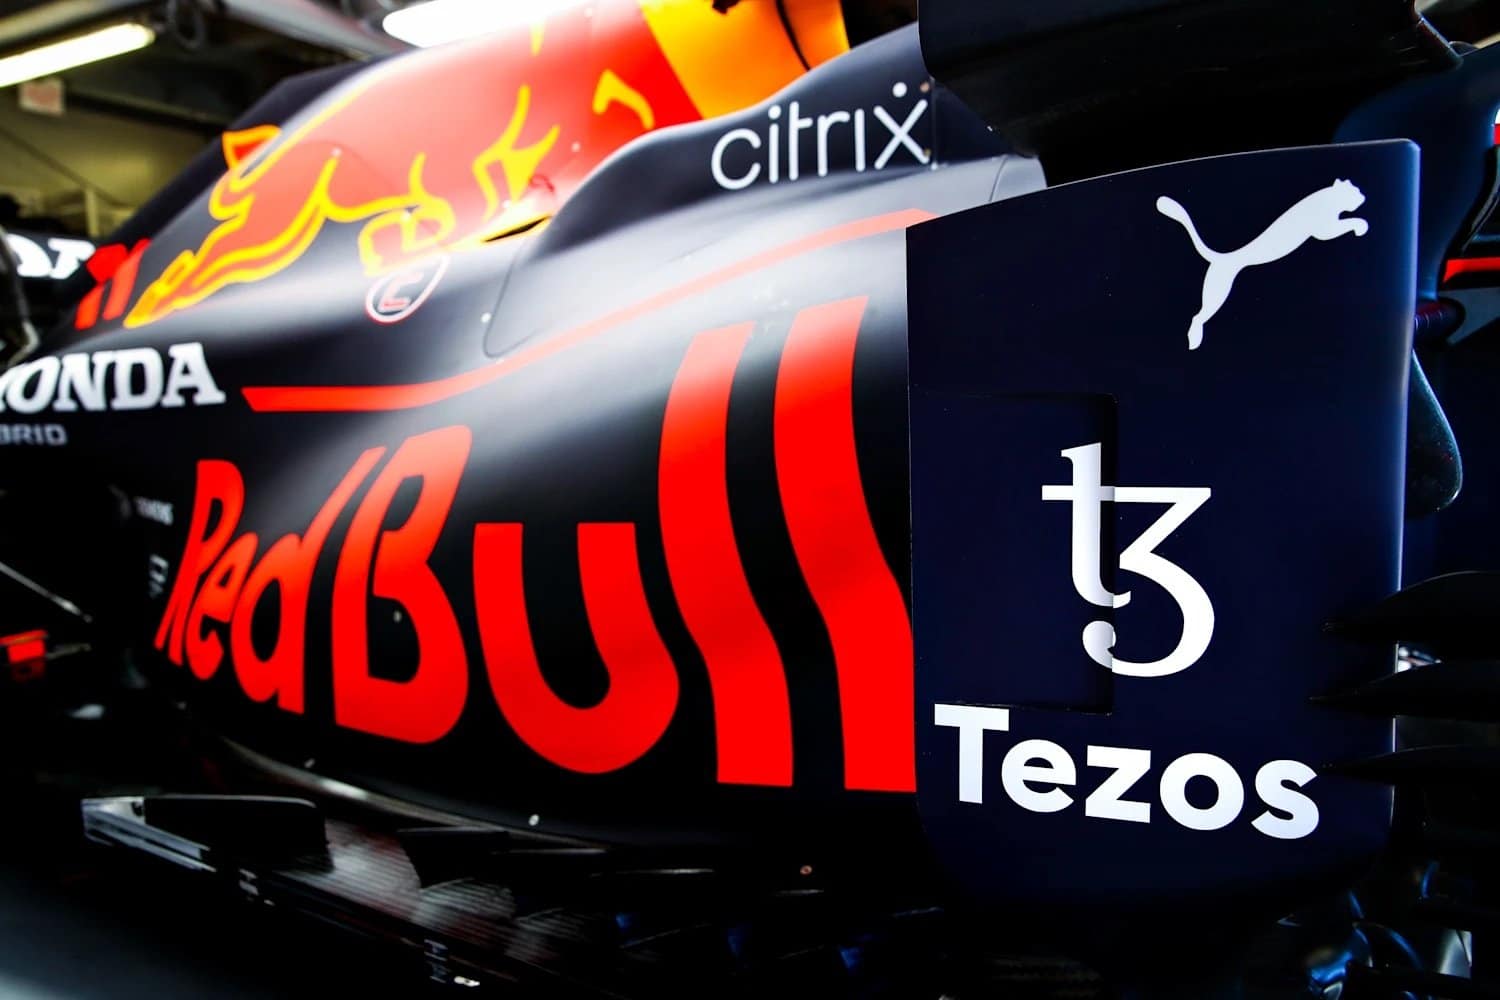 Red Bull's Formula One team embraces Tezos NFTs in ways big and small